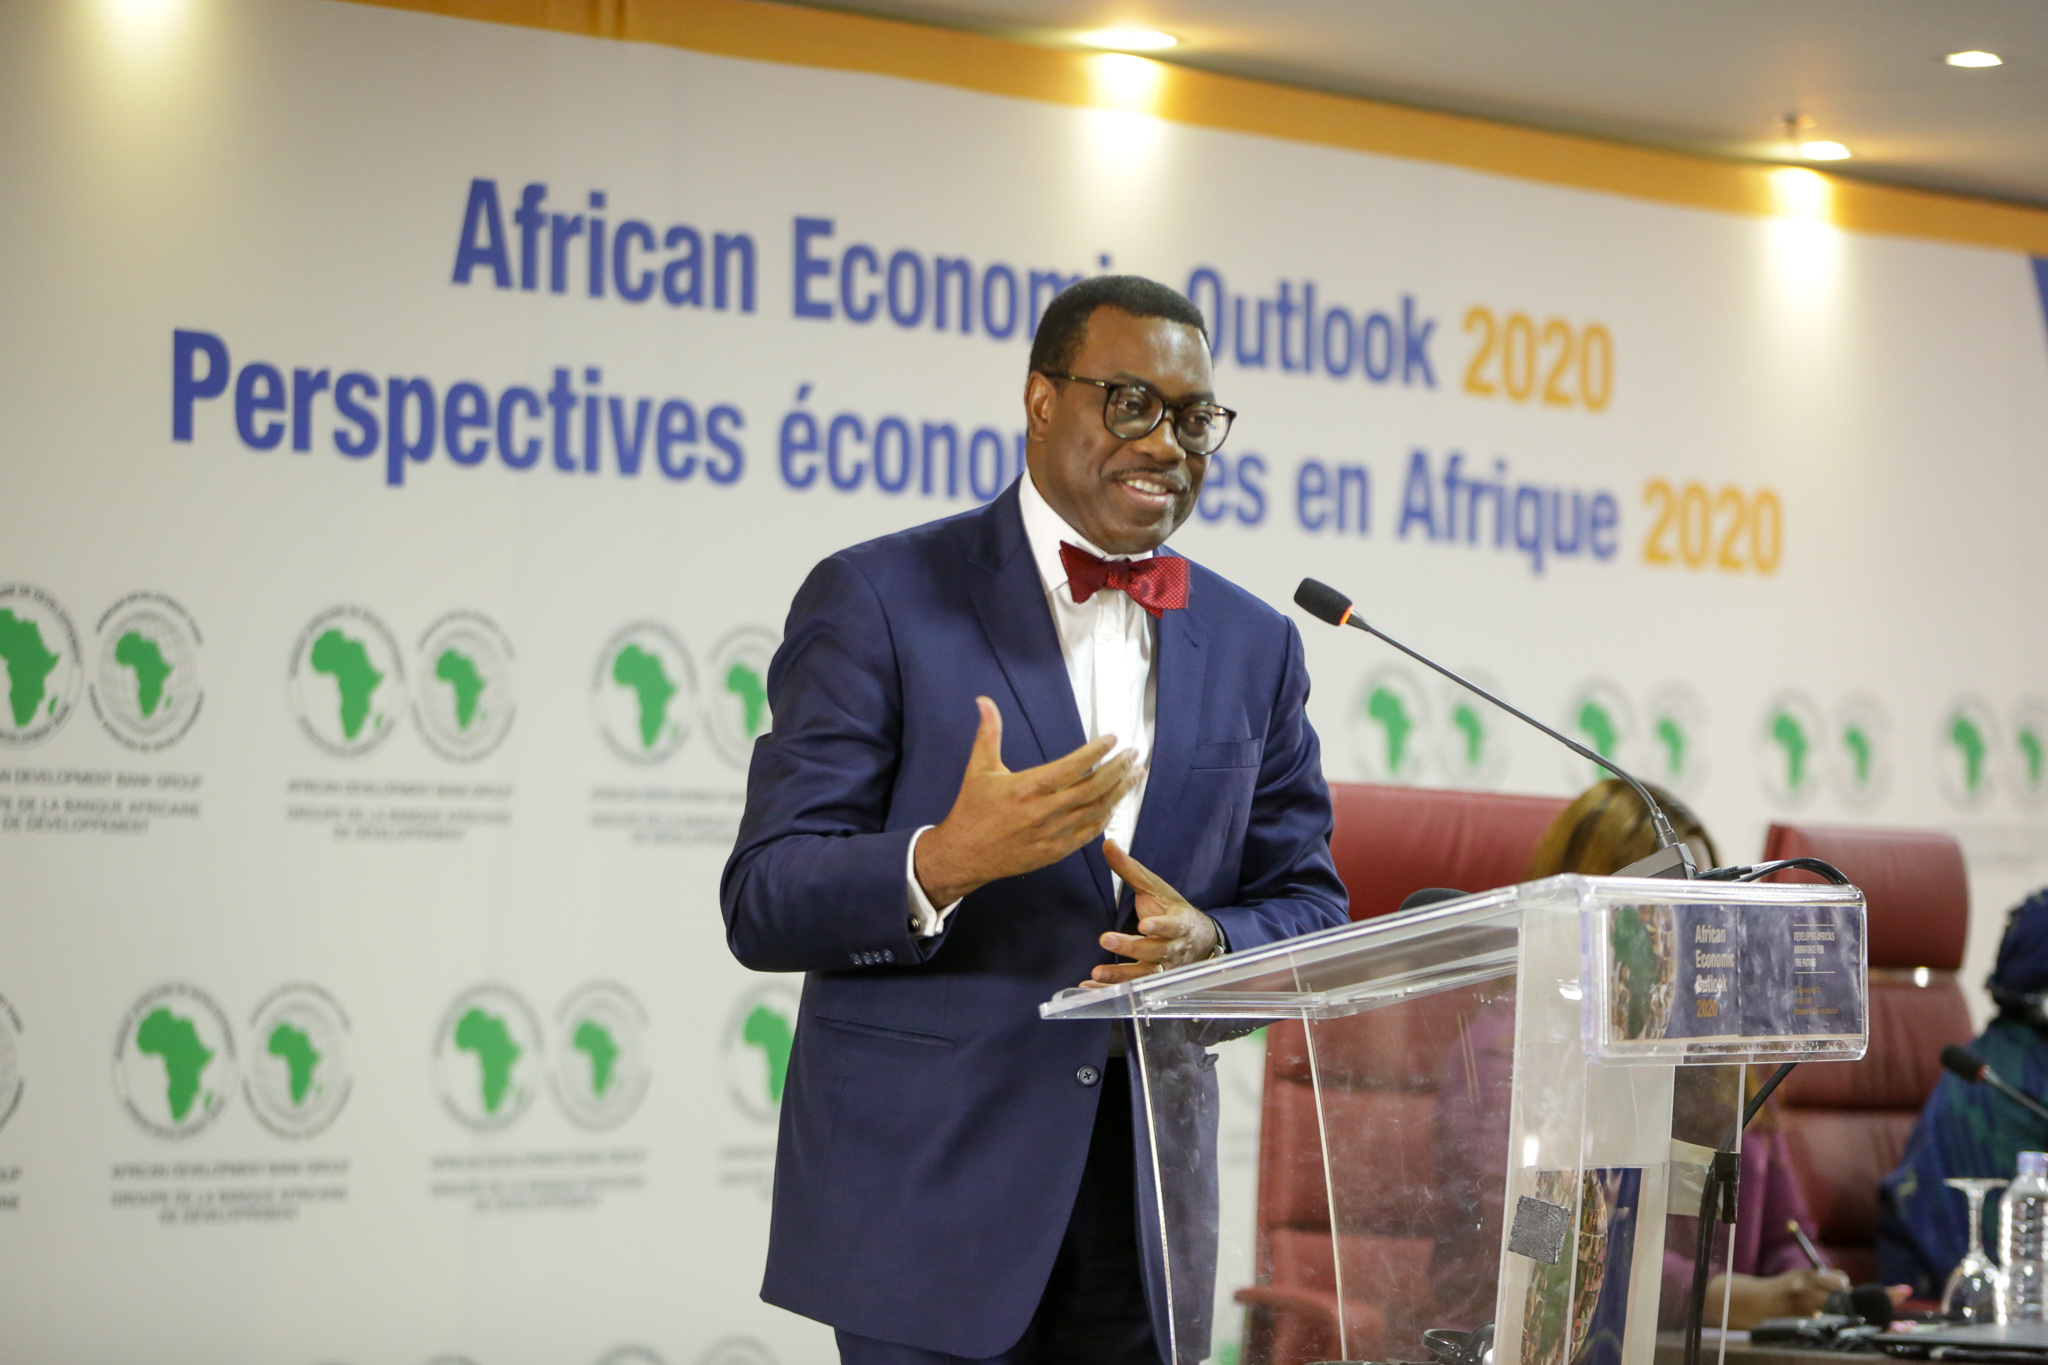 AfDB launches $3 billion Social Bond to fight COVID-19